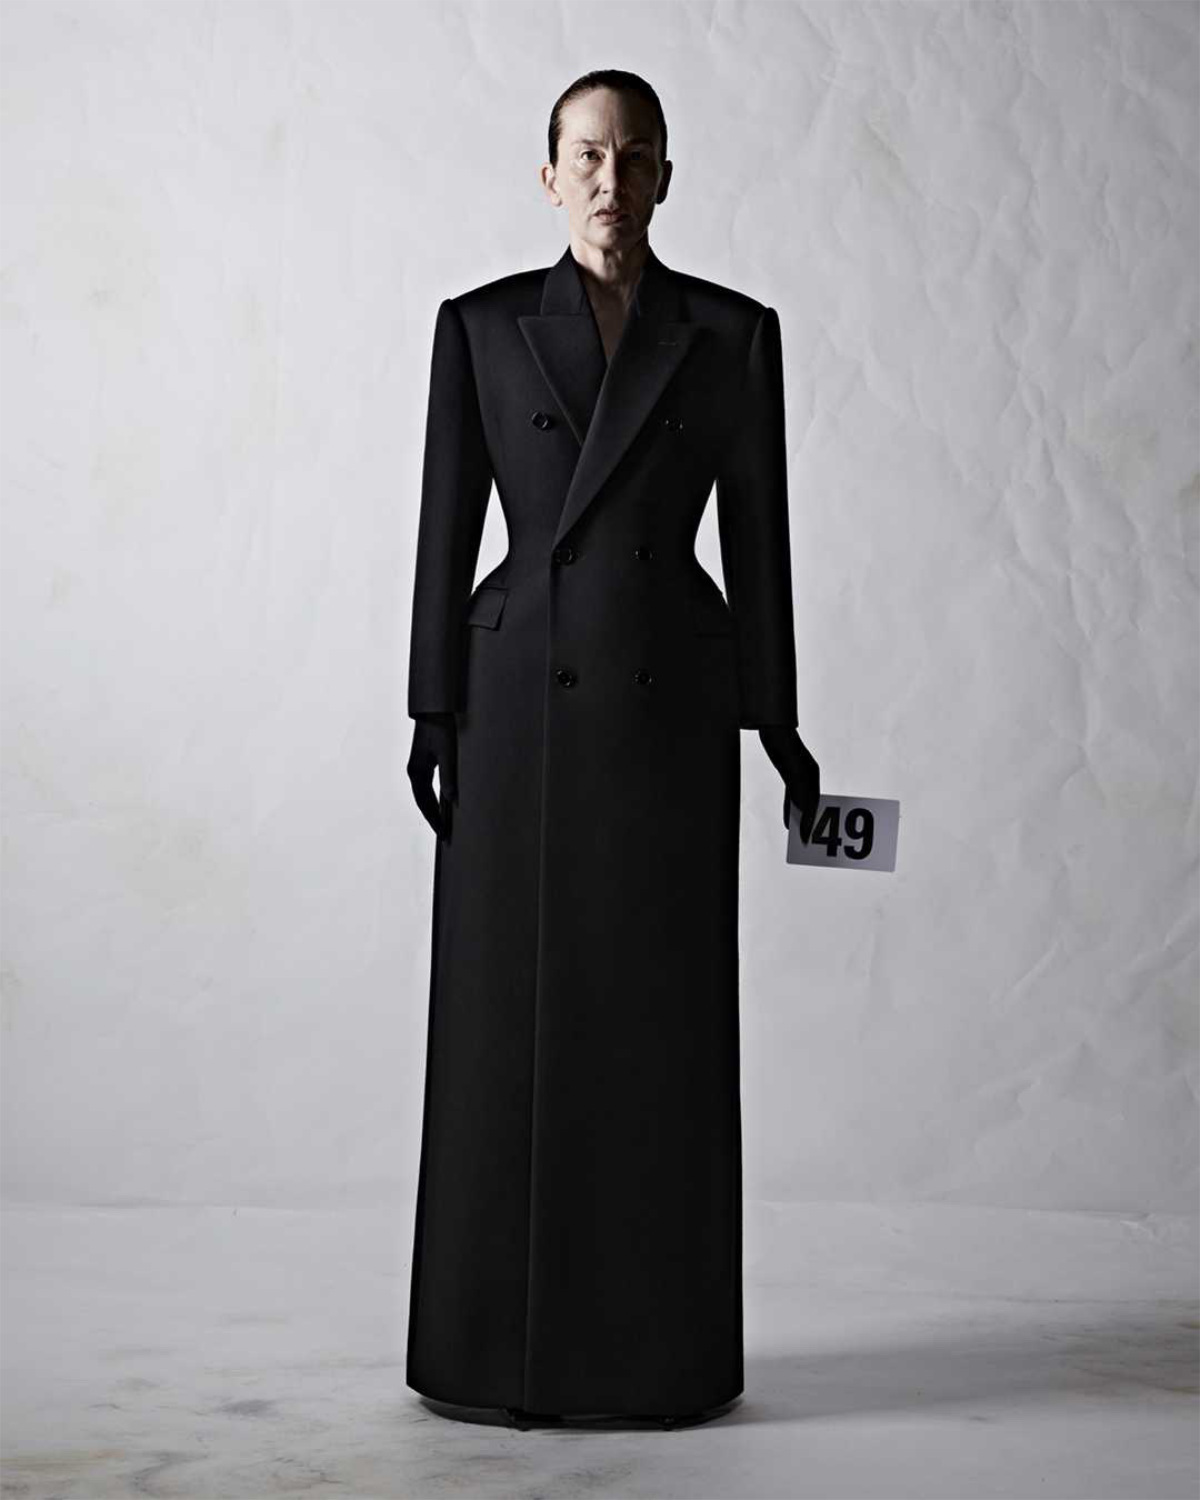 Balenciaga Presents Its New 51st Couture Collection